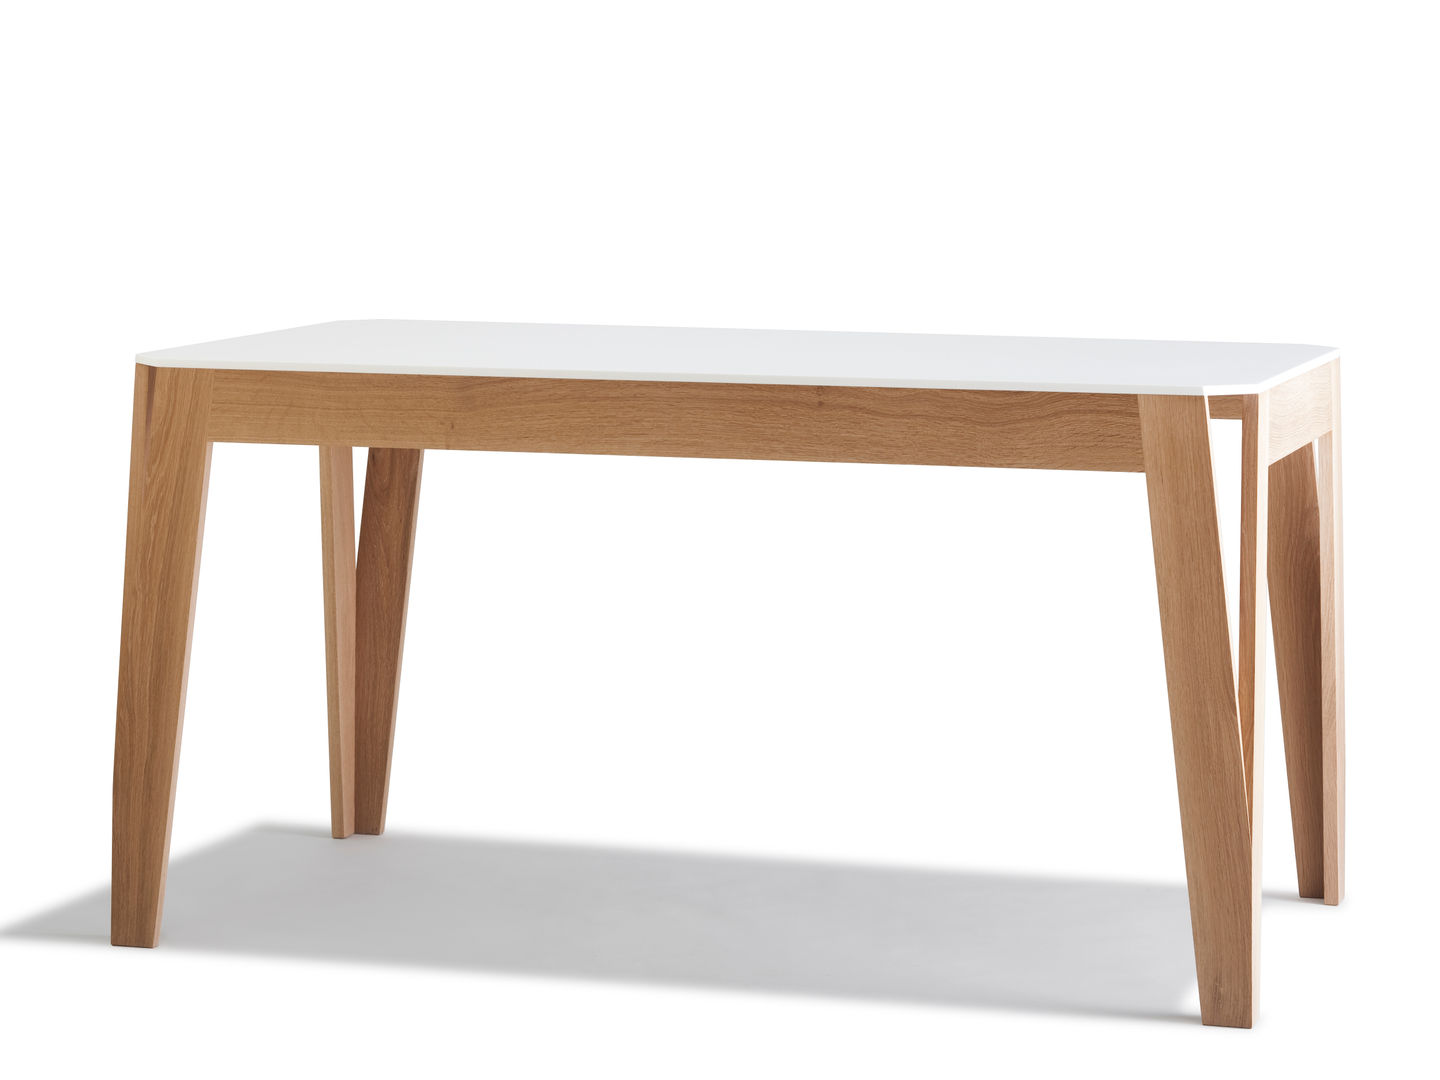 Table design en bois 100% Made in France, Atelier Hugo Delavelle Atelier Hugo Delavelle Modern kitchen Tables & chairs